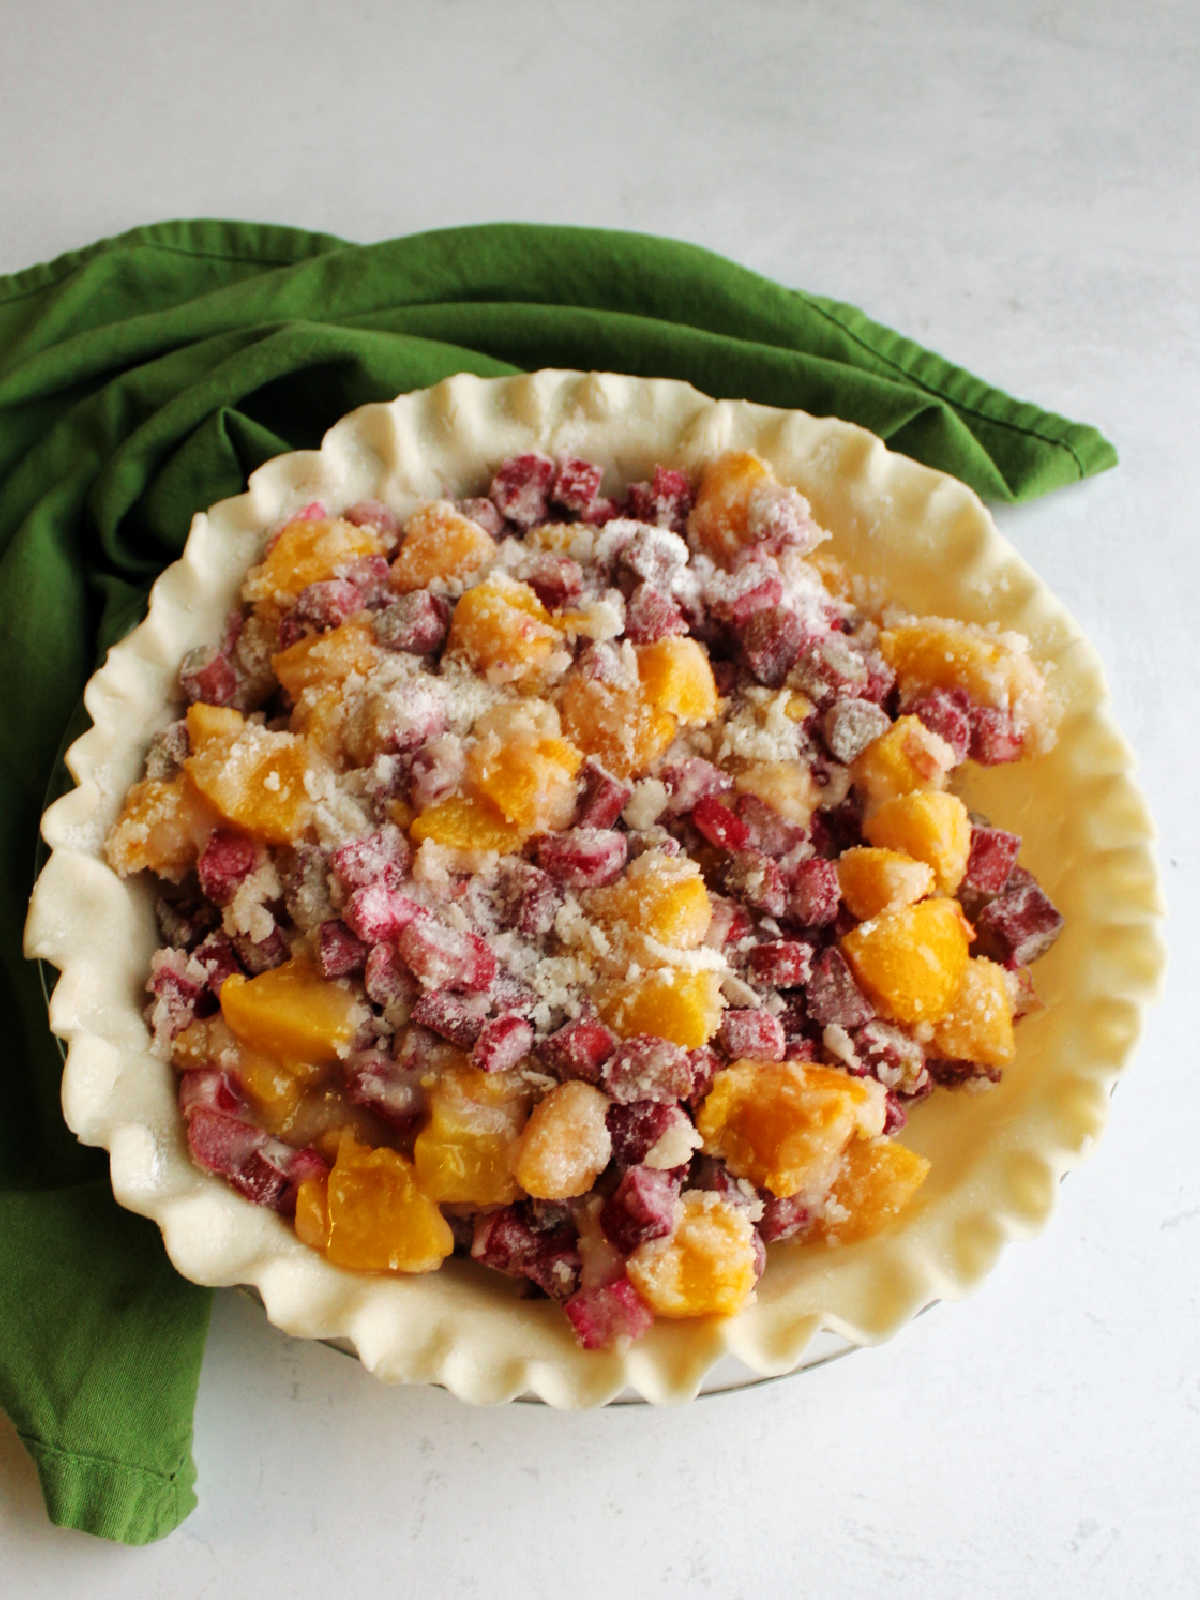 raw pie crust filled with peaches and rhubarb tossed in sugar and flour.